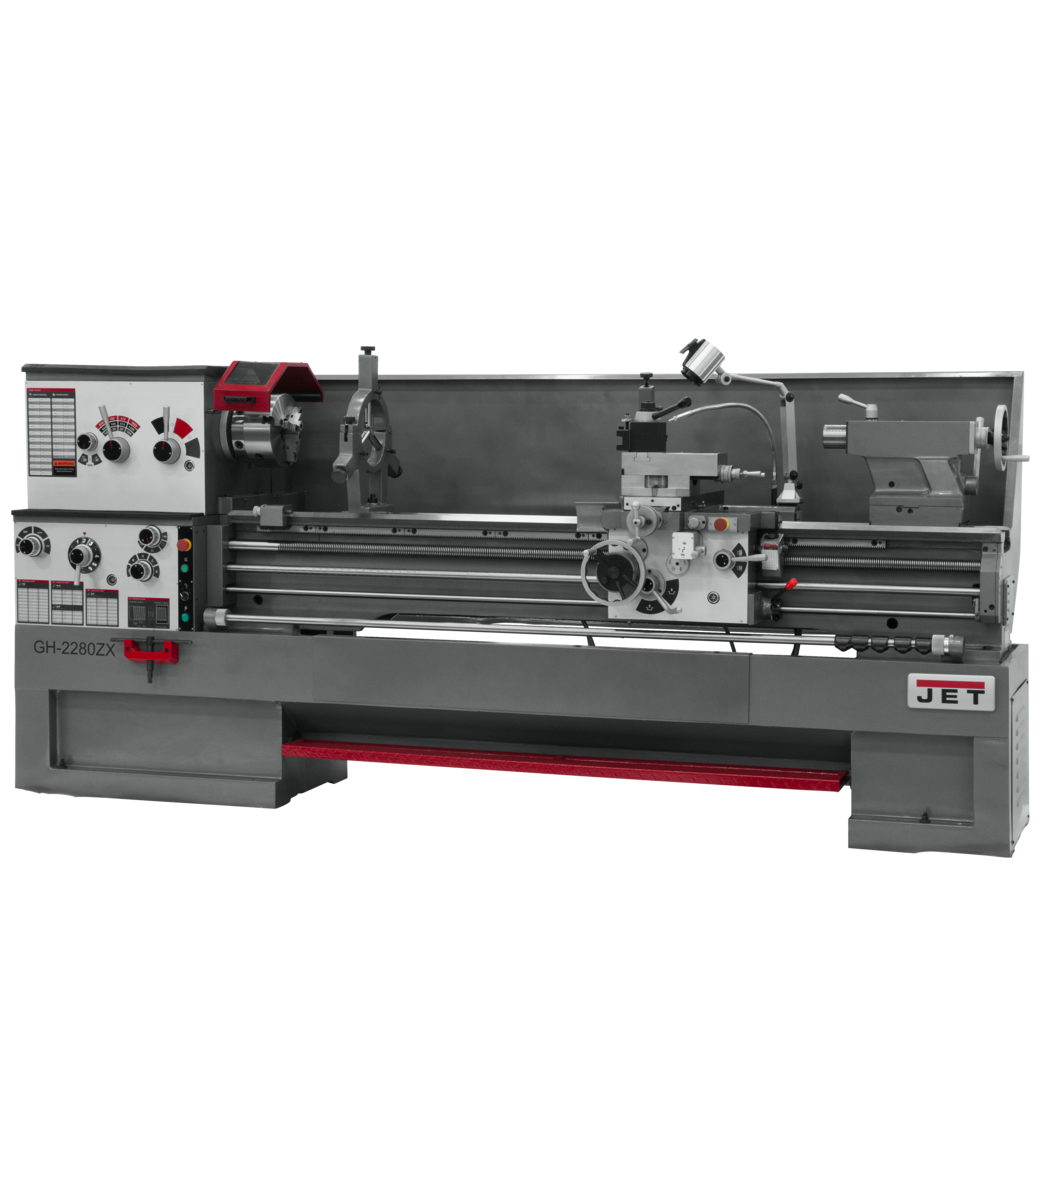 321980, GH-2280ZX, GH-2280ZX, 22" Swing, 80" Centers, 10HP, 3Ph, 230V, Jet, Metalworking, Turning, Lathes